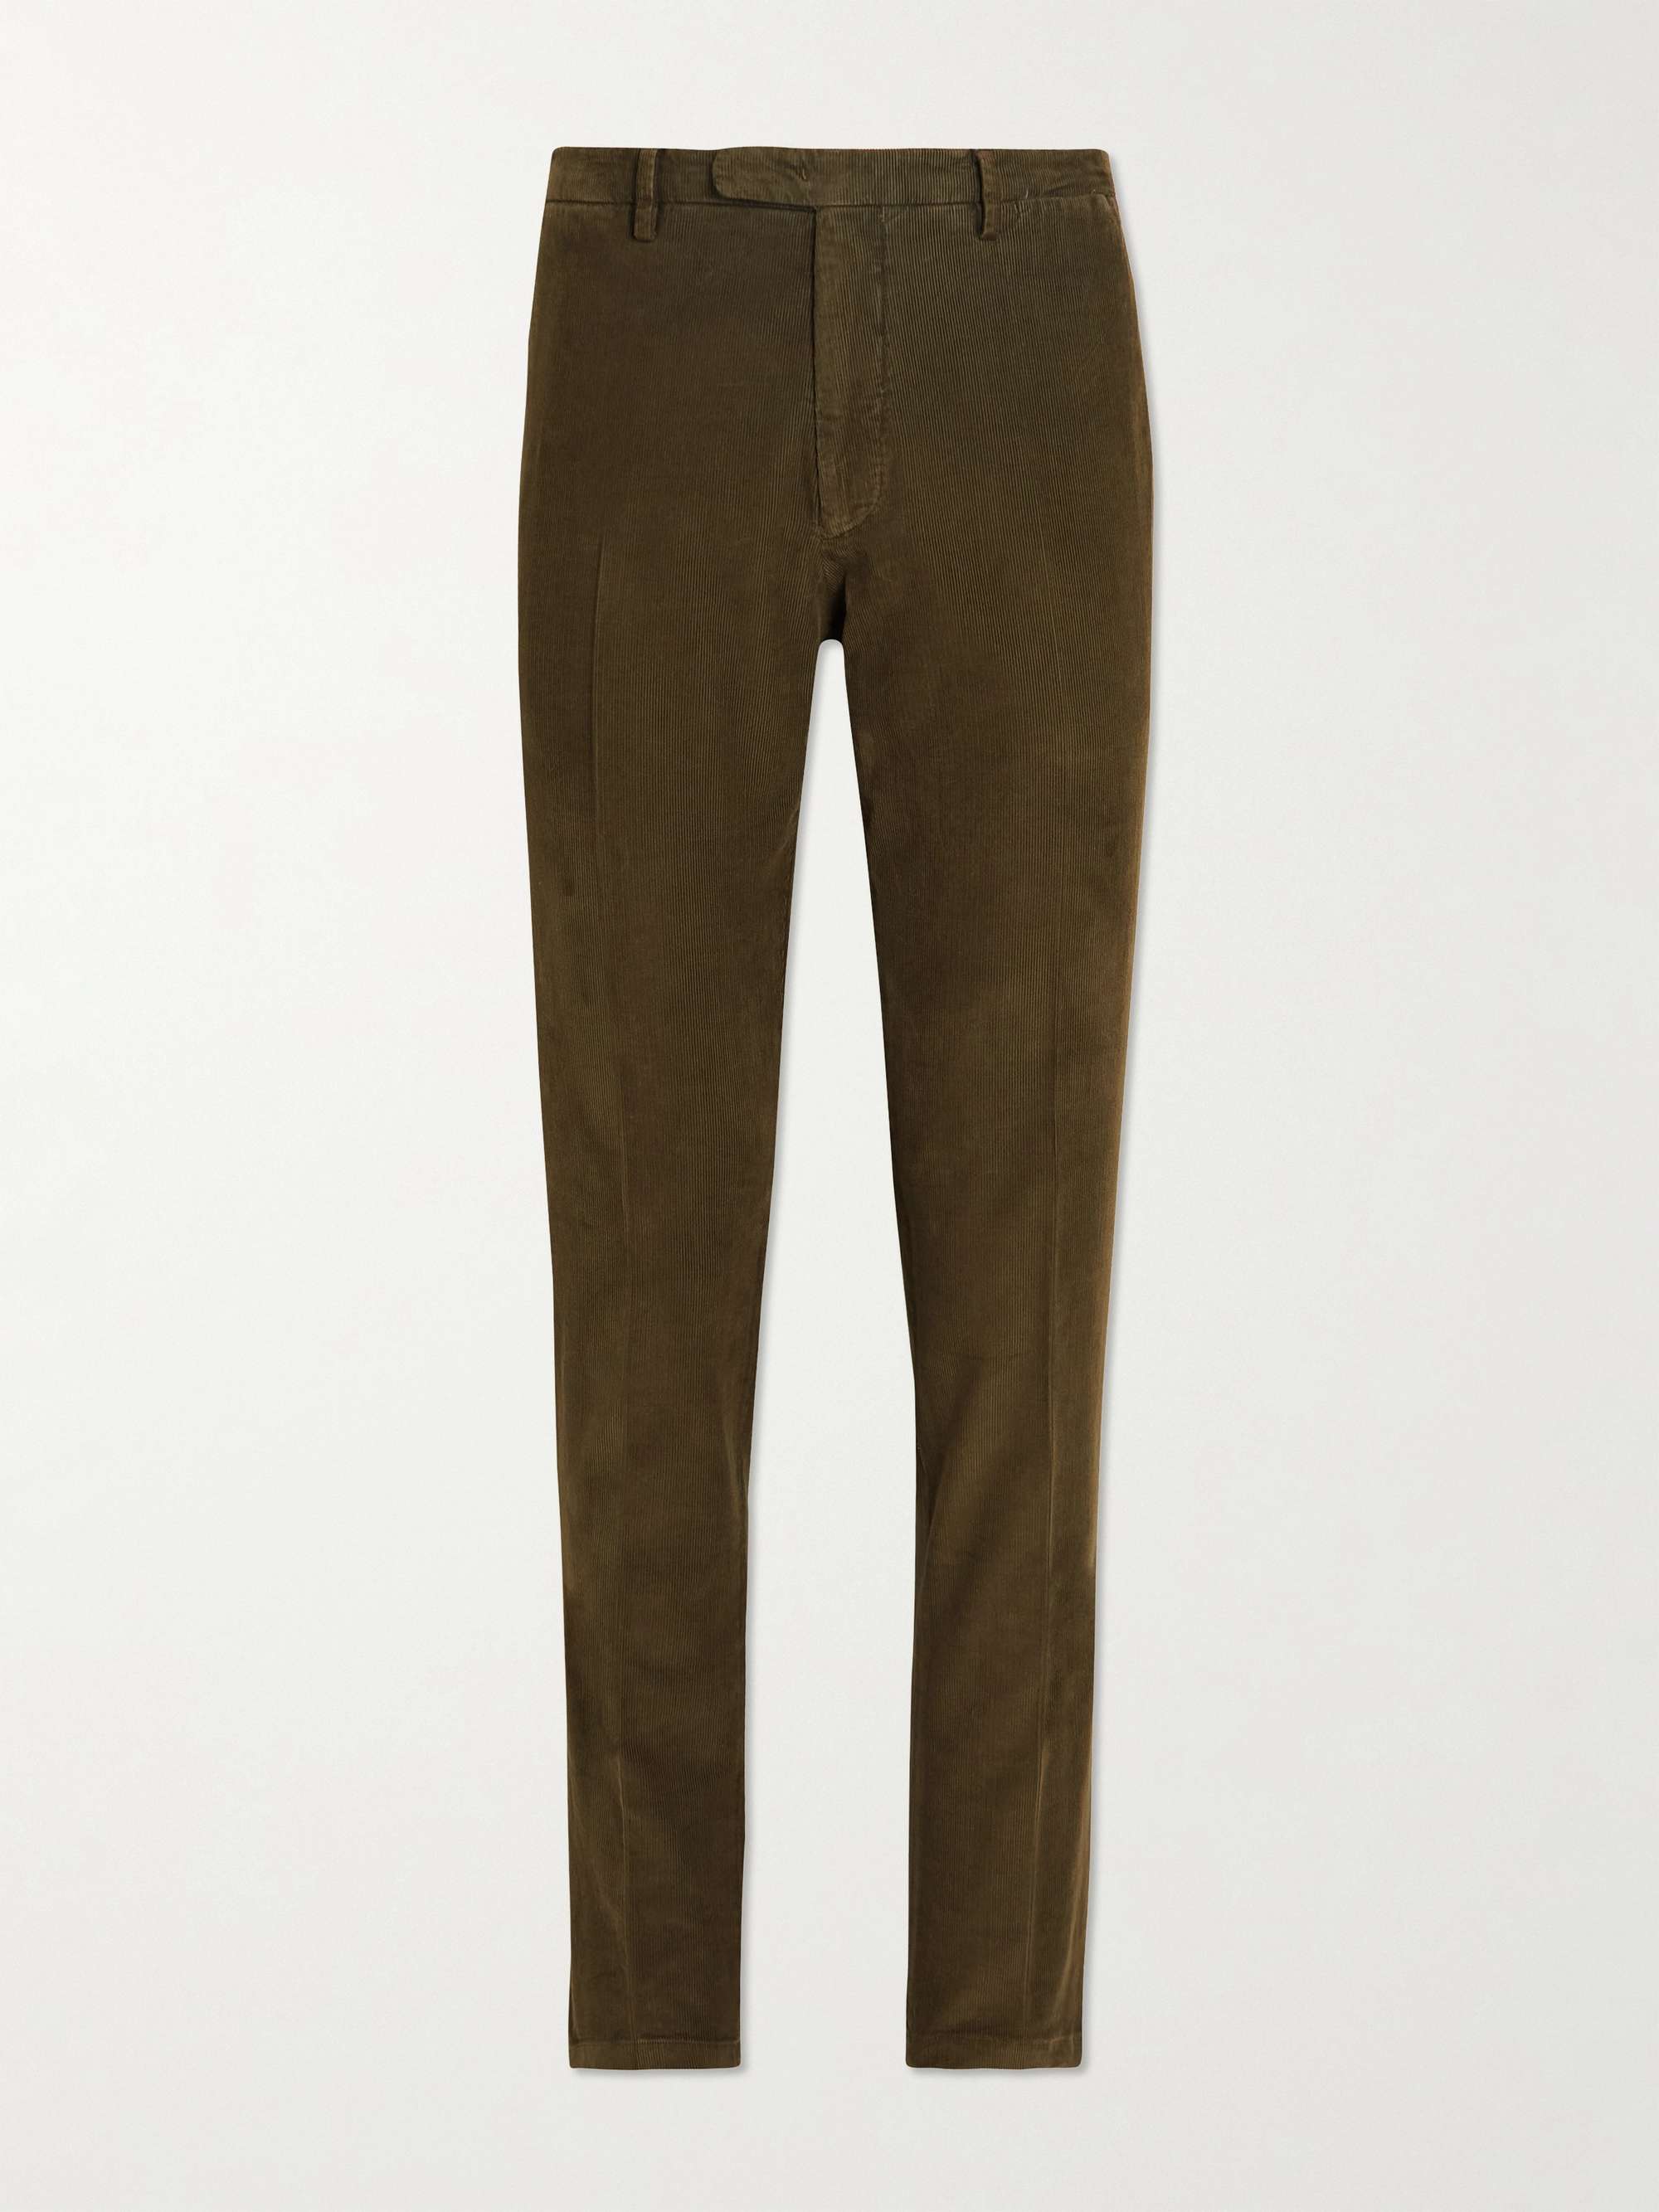 BOGLIOLI Slim-Fit Tapered Garment-Dyed Cotton-Blend Corduroy Trousers